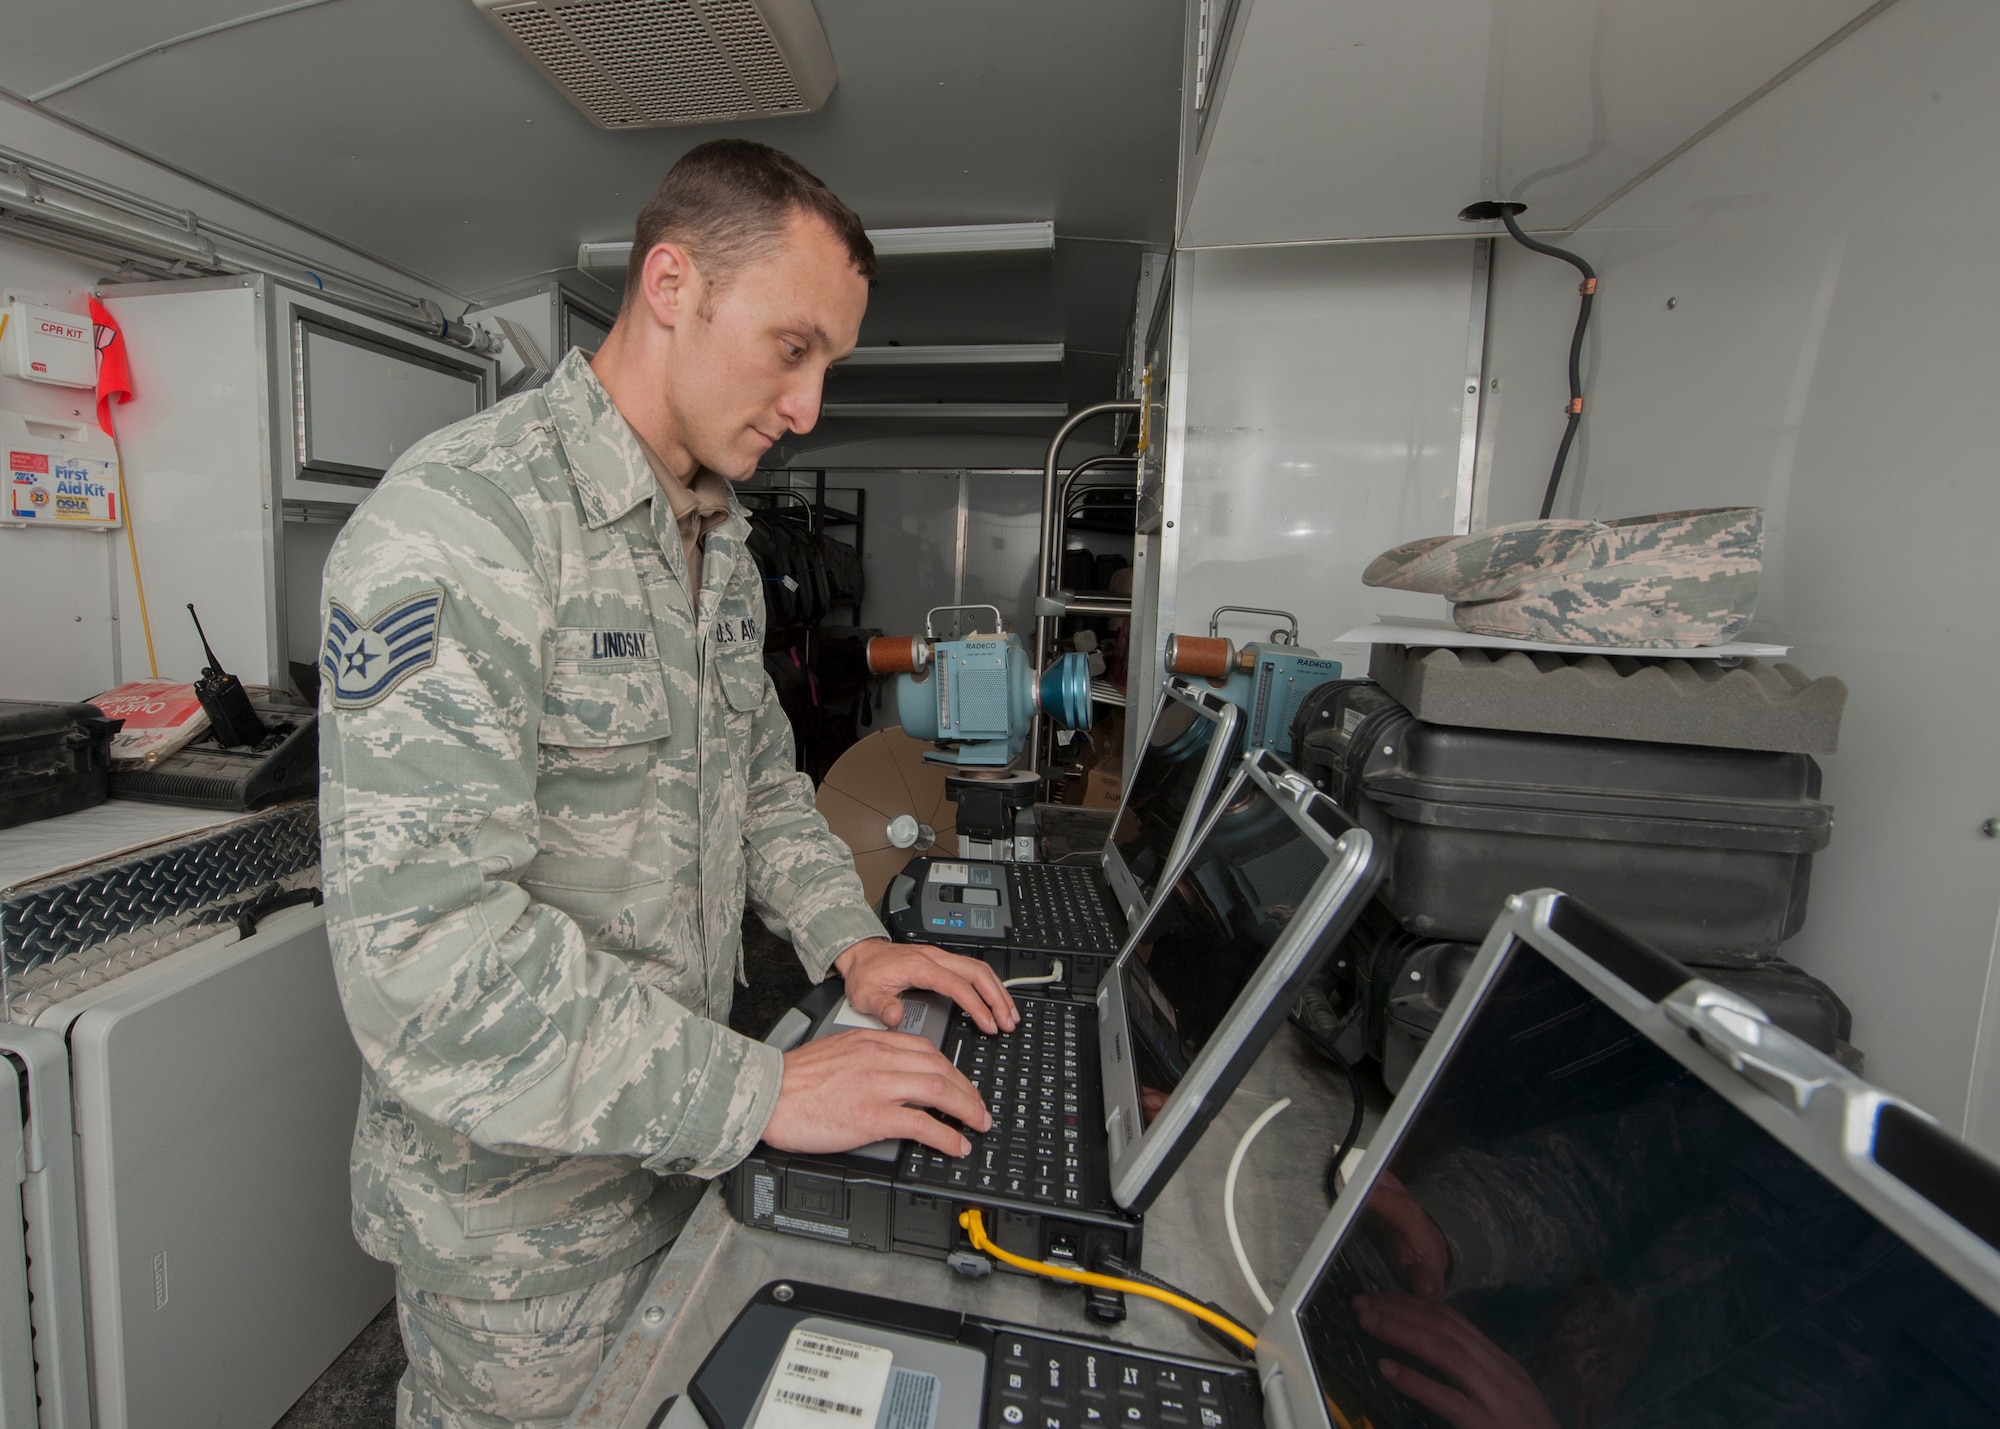 Staff Sgt. Michael Lindsay, a Hammer Adaptive Communication Element operator, starts up a computer inside a communication trailer outside an F-16 crash site northwest of Salinas Peak, New Mexico on Nov. 26. Lindsay and two other Hammer A.C.E. team members flew from Georgia to help Holloman acquire and maintain communications during the crash investigation. (U.S. Air Force photo by Airman 1st Class Randahl J. Jenson)  